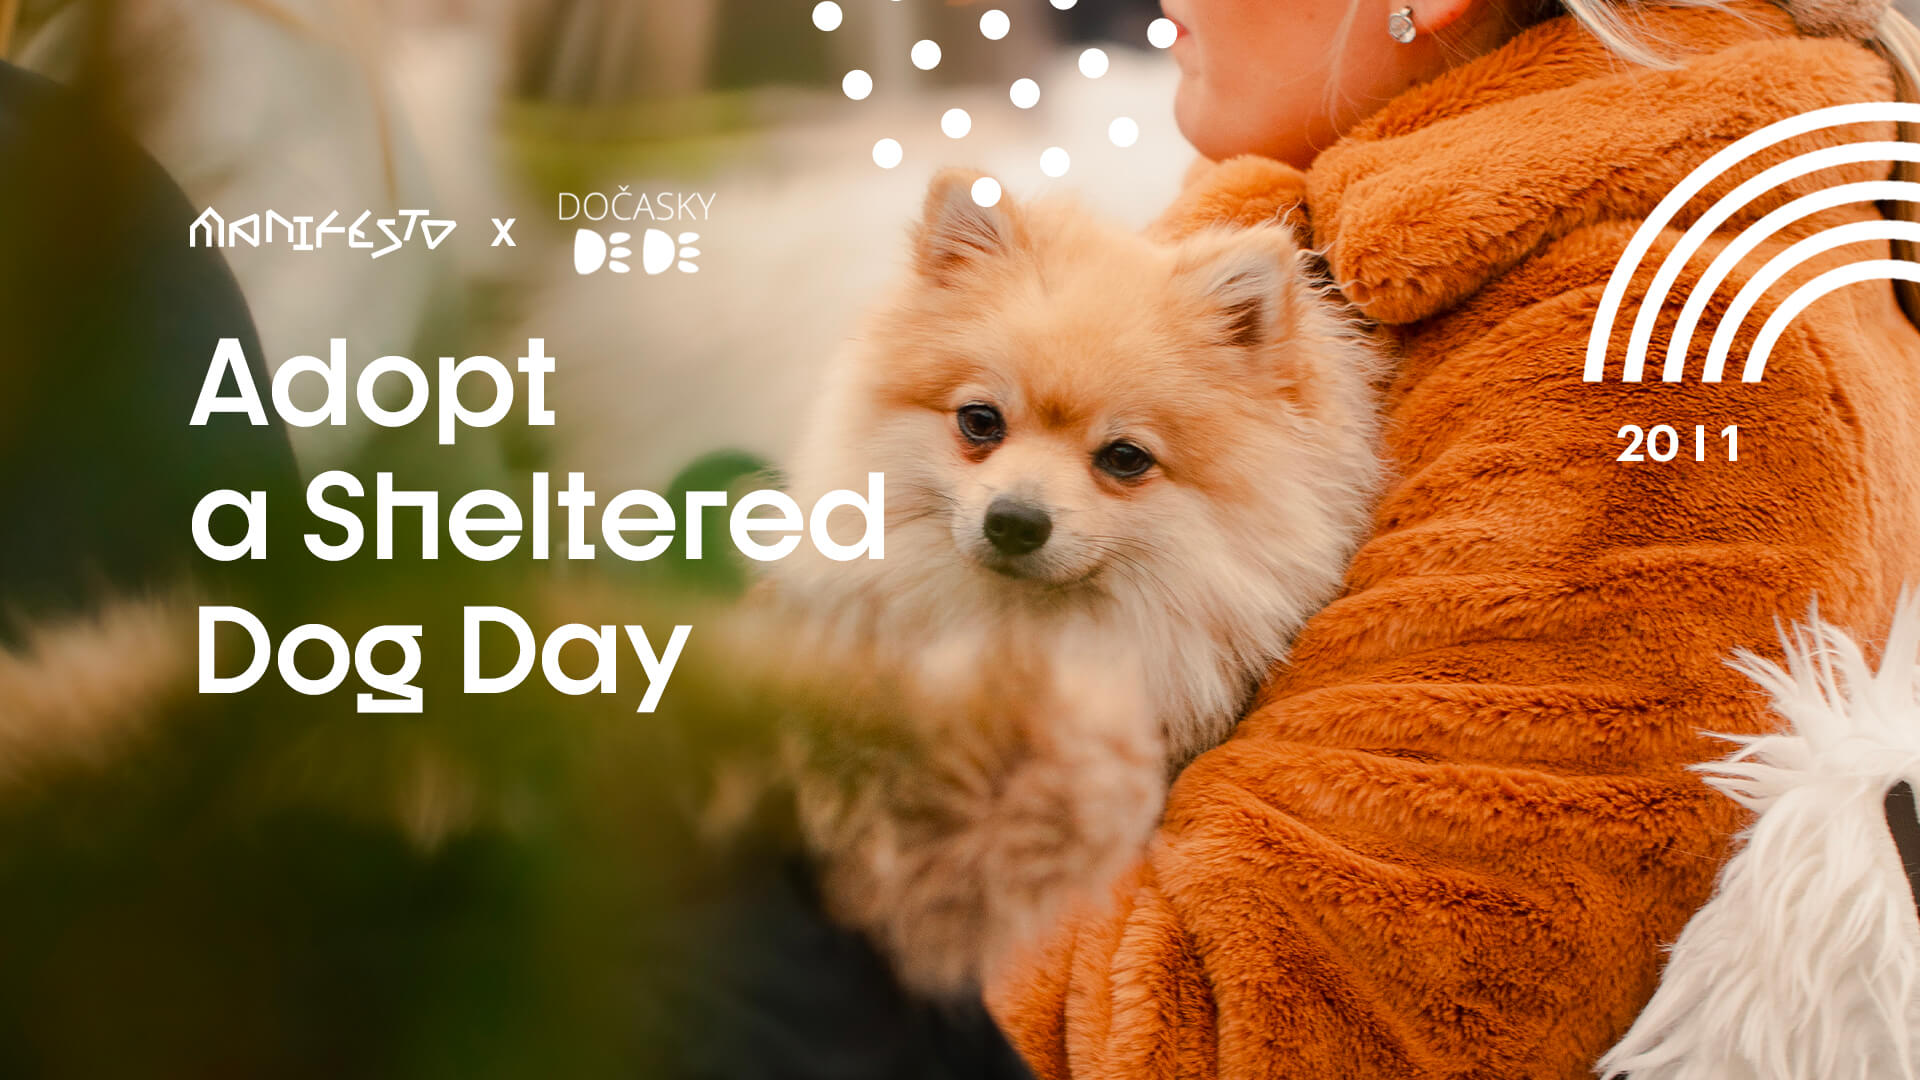 Adopt a Sheltered Dog Day, 20/01